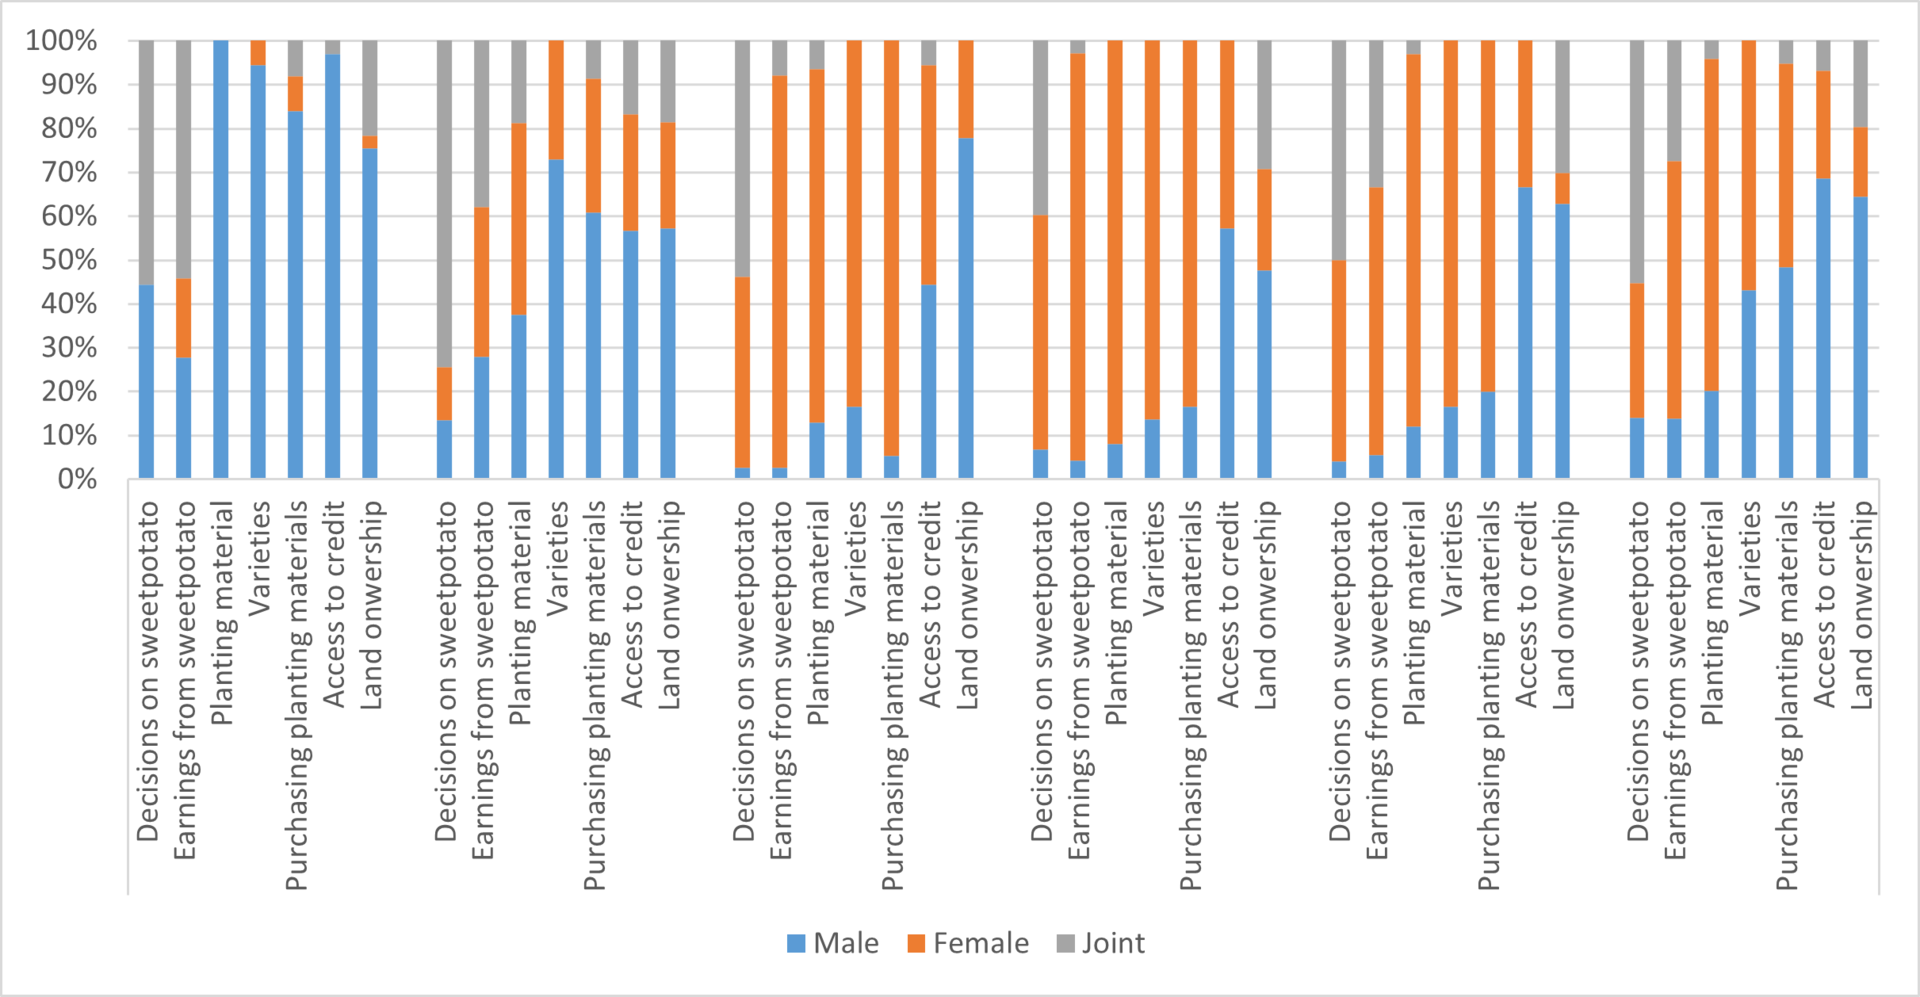 Figure 1. Gender patterns of decision-making and asset ownership across sweet potato value chains